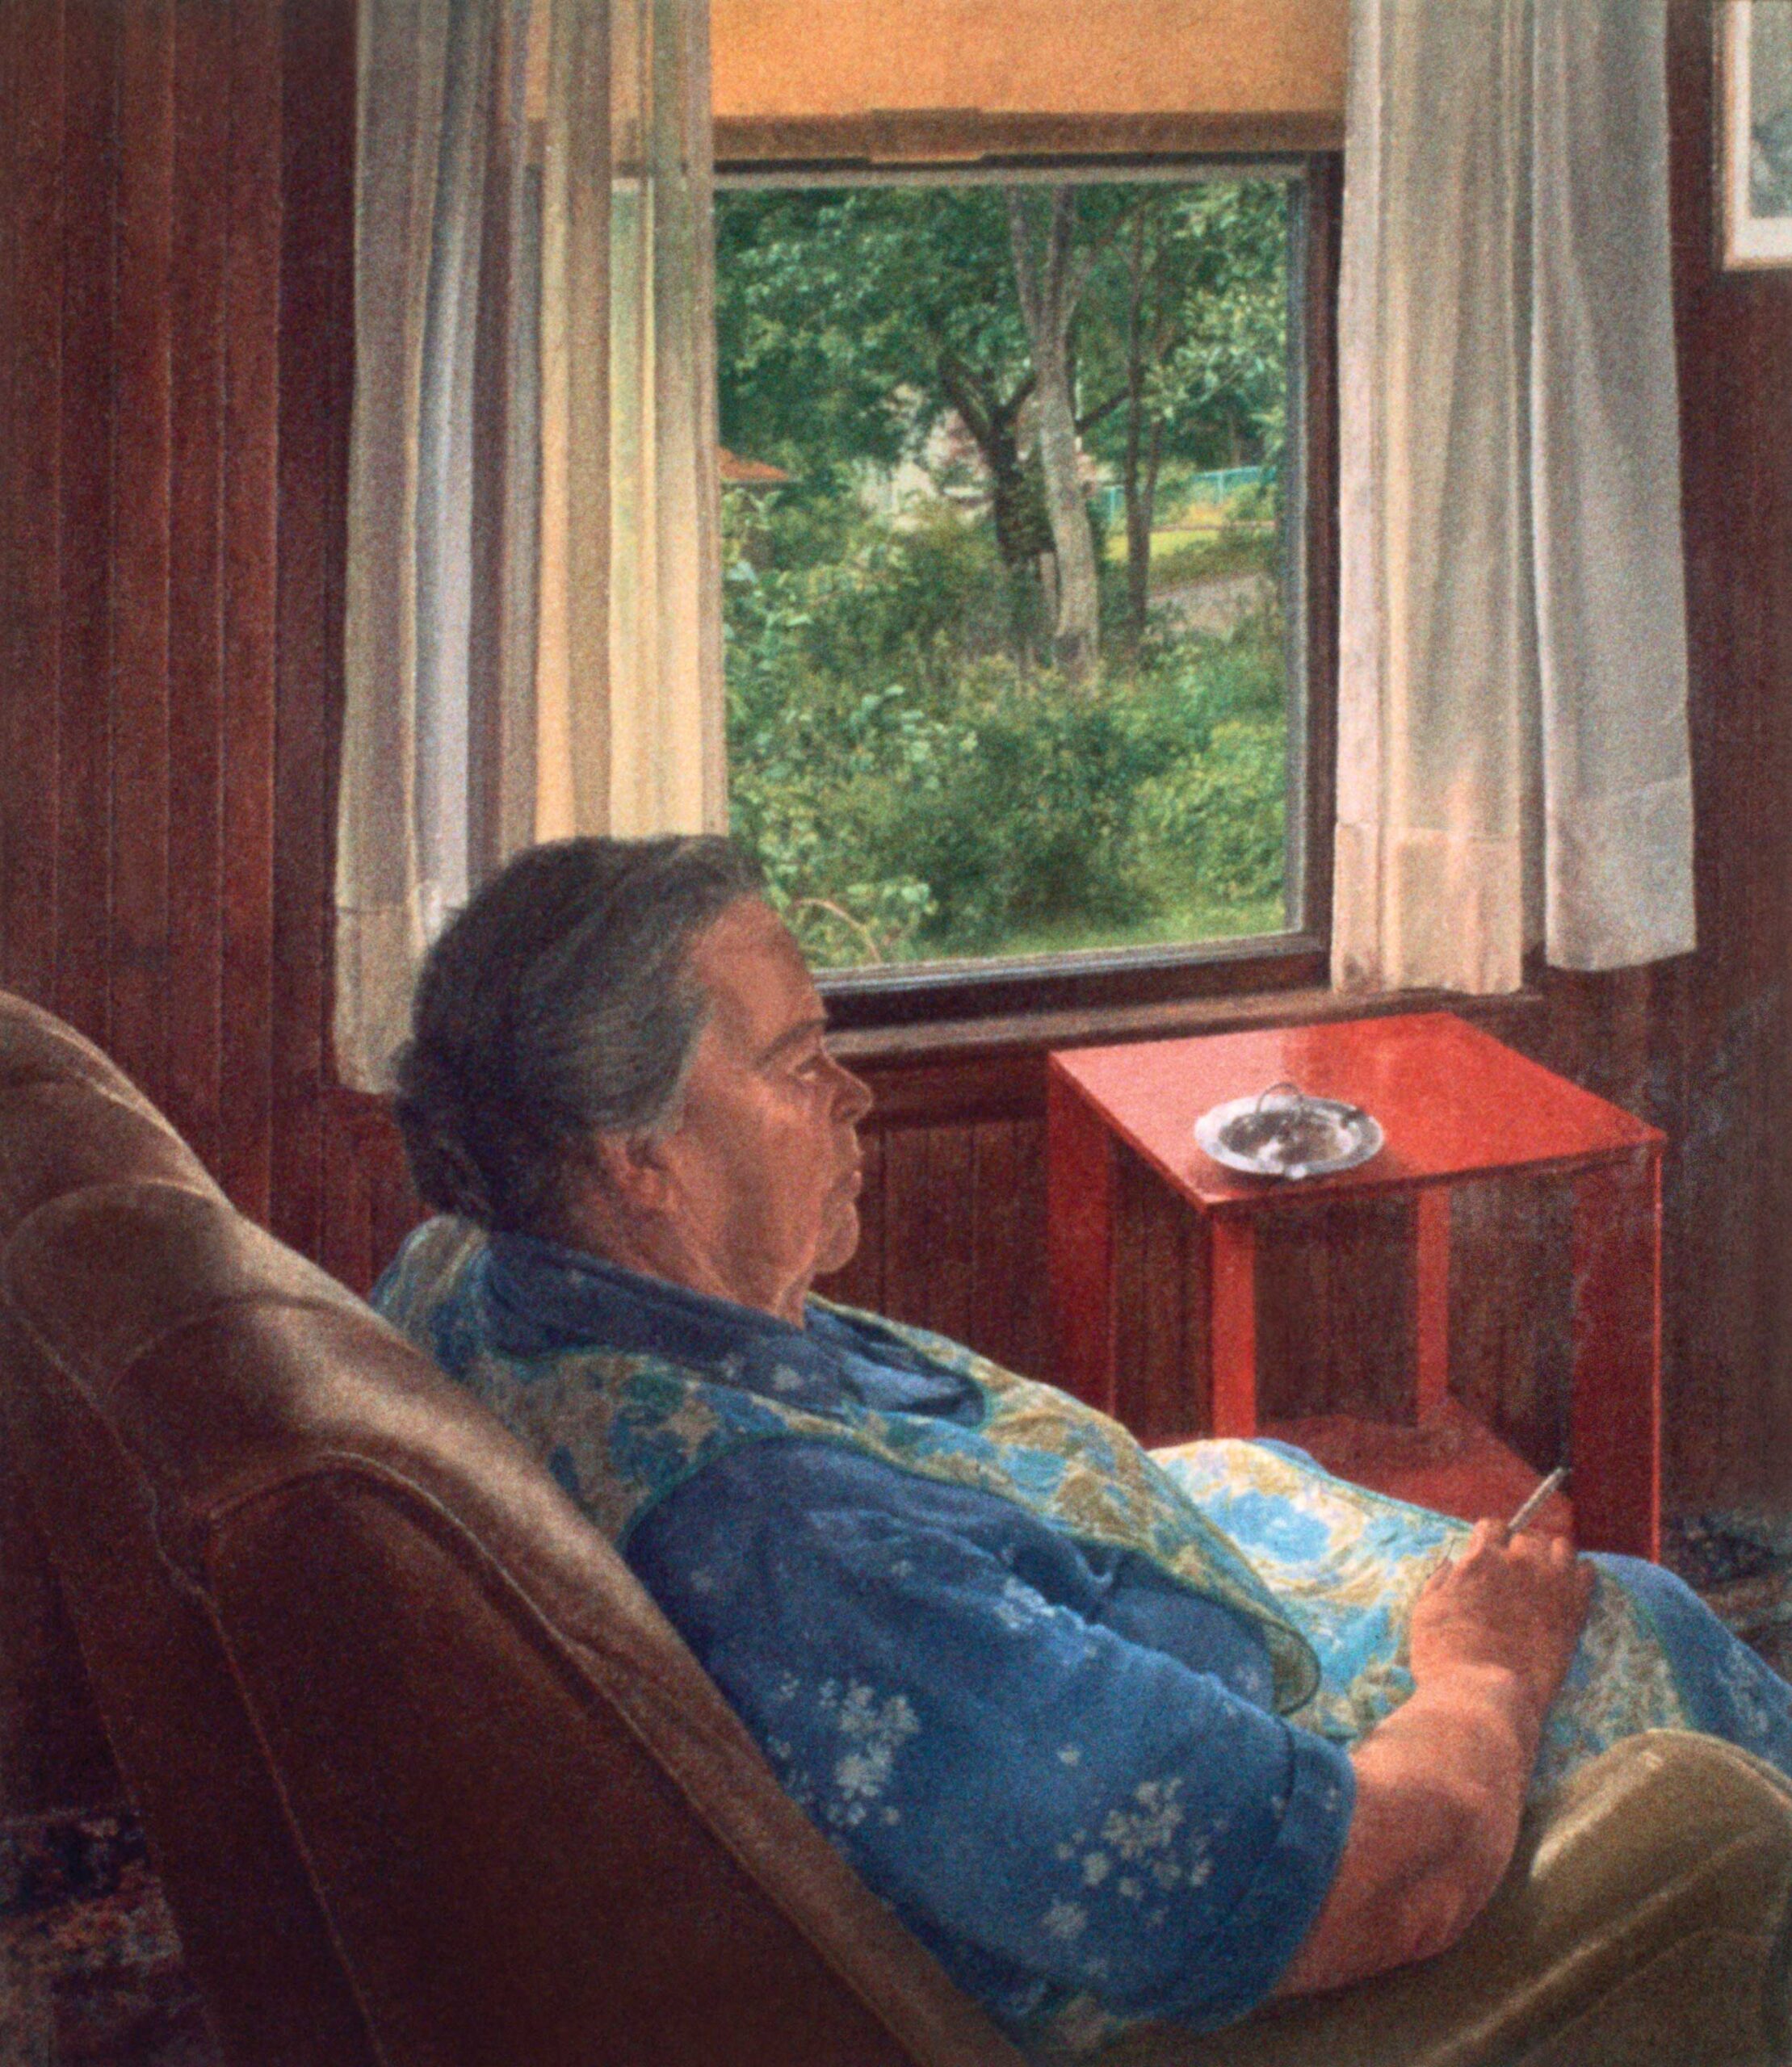 Catherine Murphy, “Catherine O’Reilly Murphy,” 1979, oil on canvas, 32 x 28 in., private collection, collection of Levi Strauss & Co.